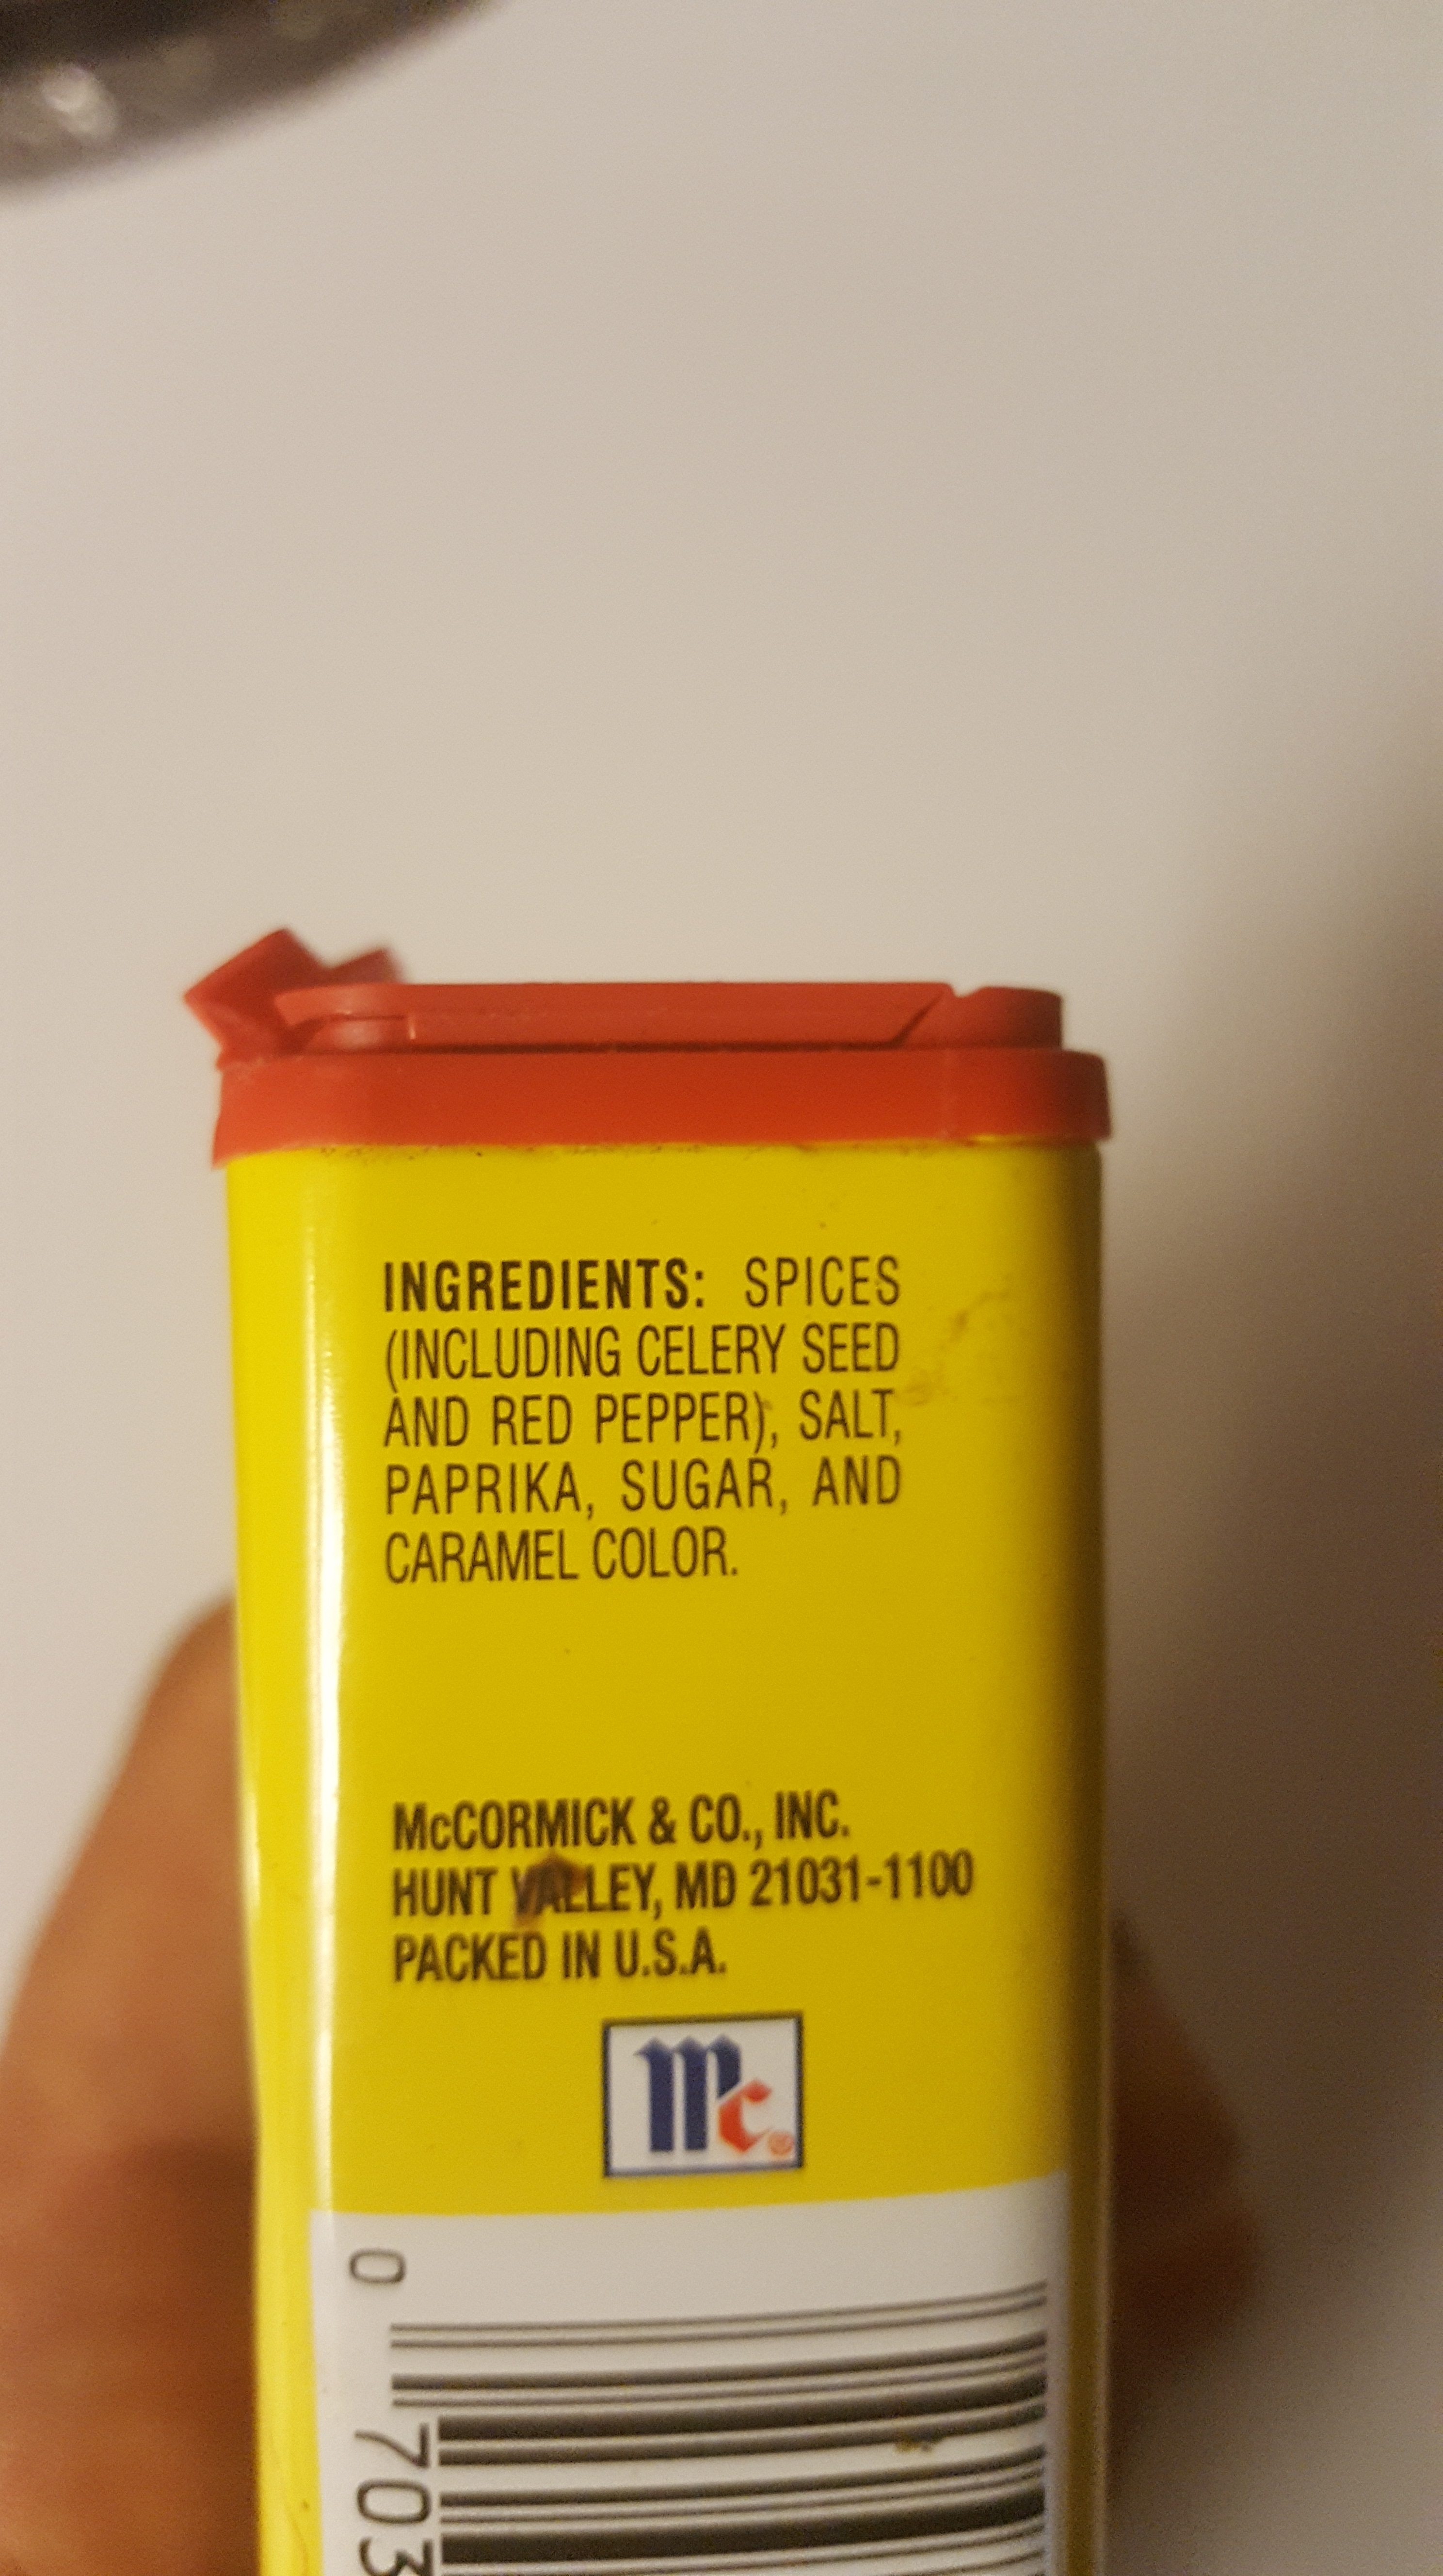 inspect spices won't treat psoriasis